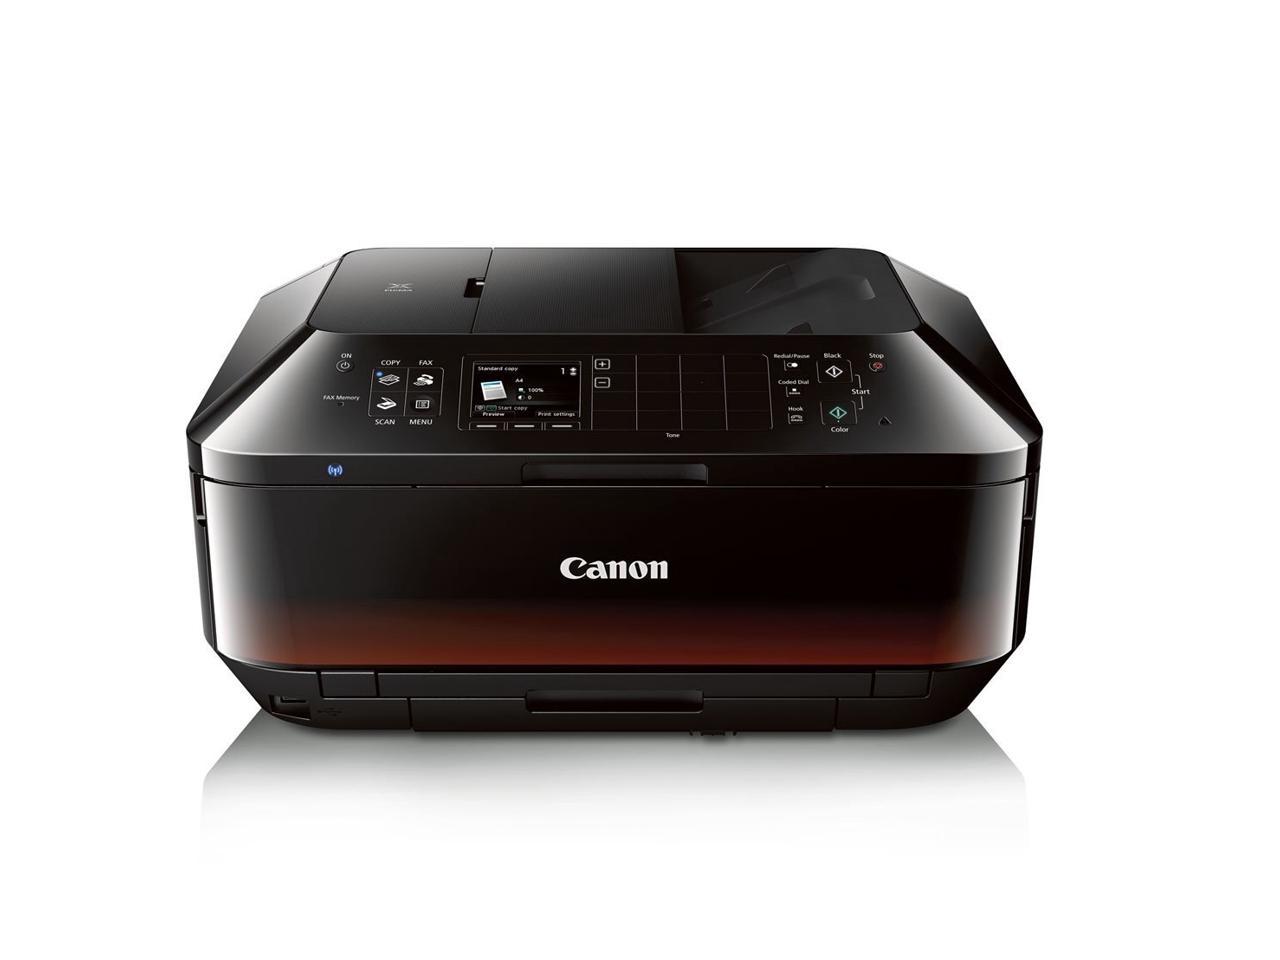 Canon Office and Business MX922 Allinone Printer, Wireless and mobile